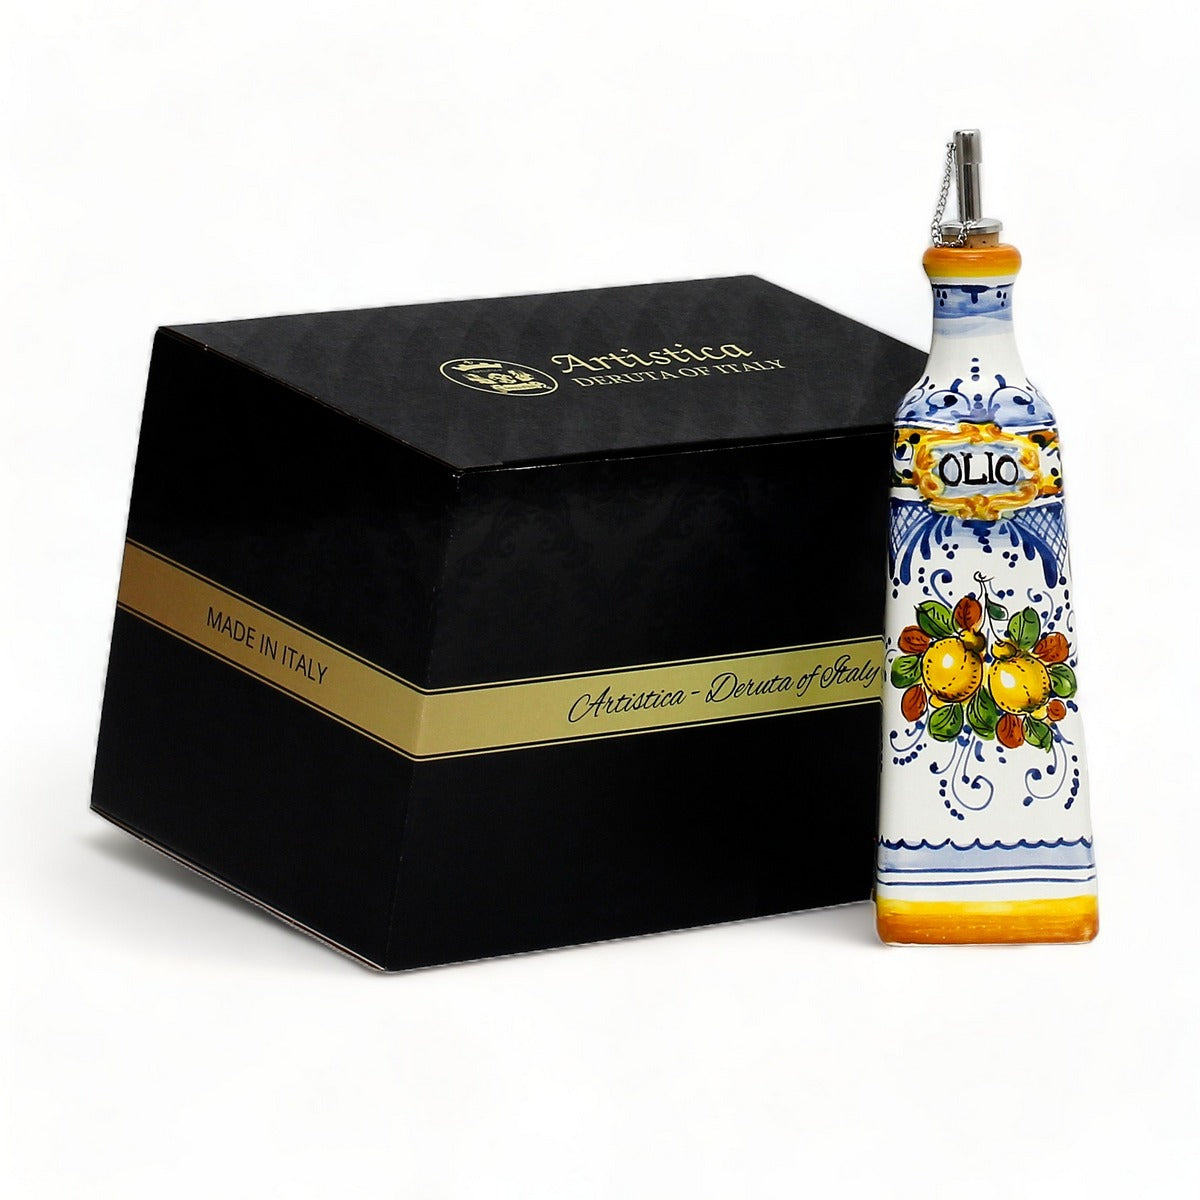 GIFT BOX: With authentic Deruta hand painted ceramic - LIMONCINI: SQUARE OLIVE OIL BOTTLE DISPENSER